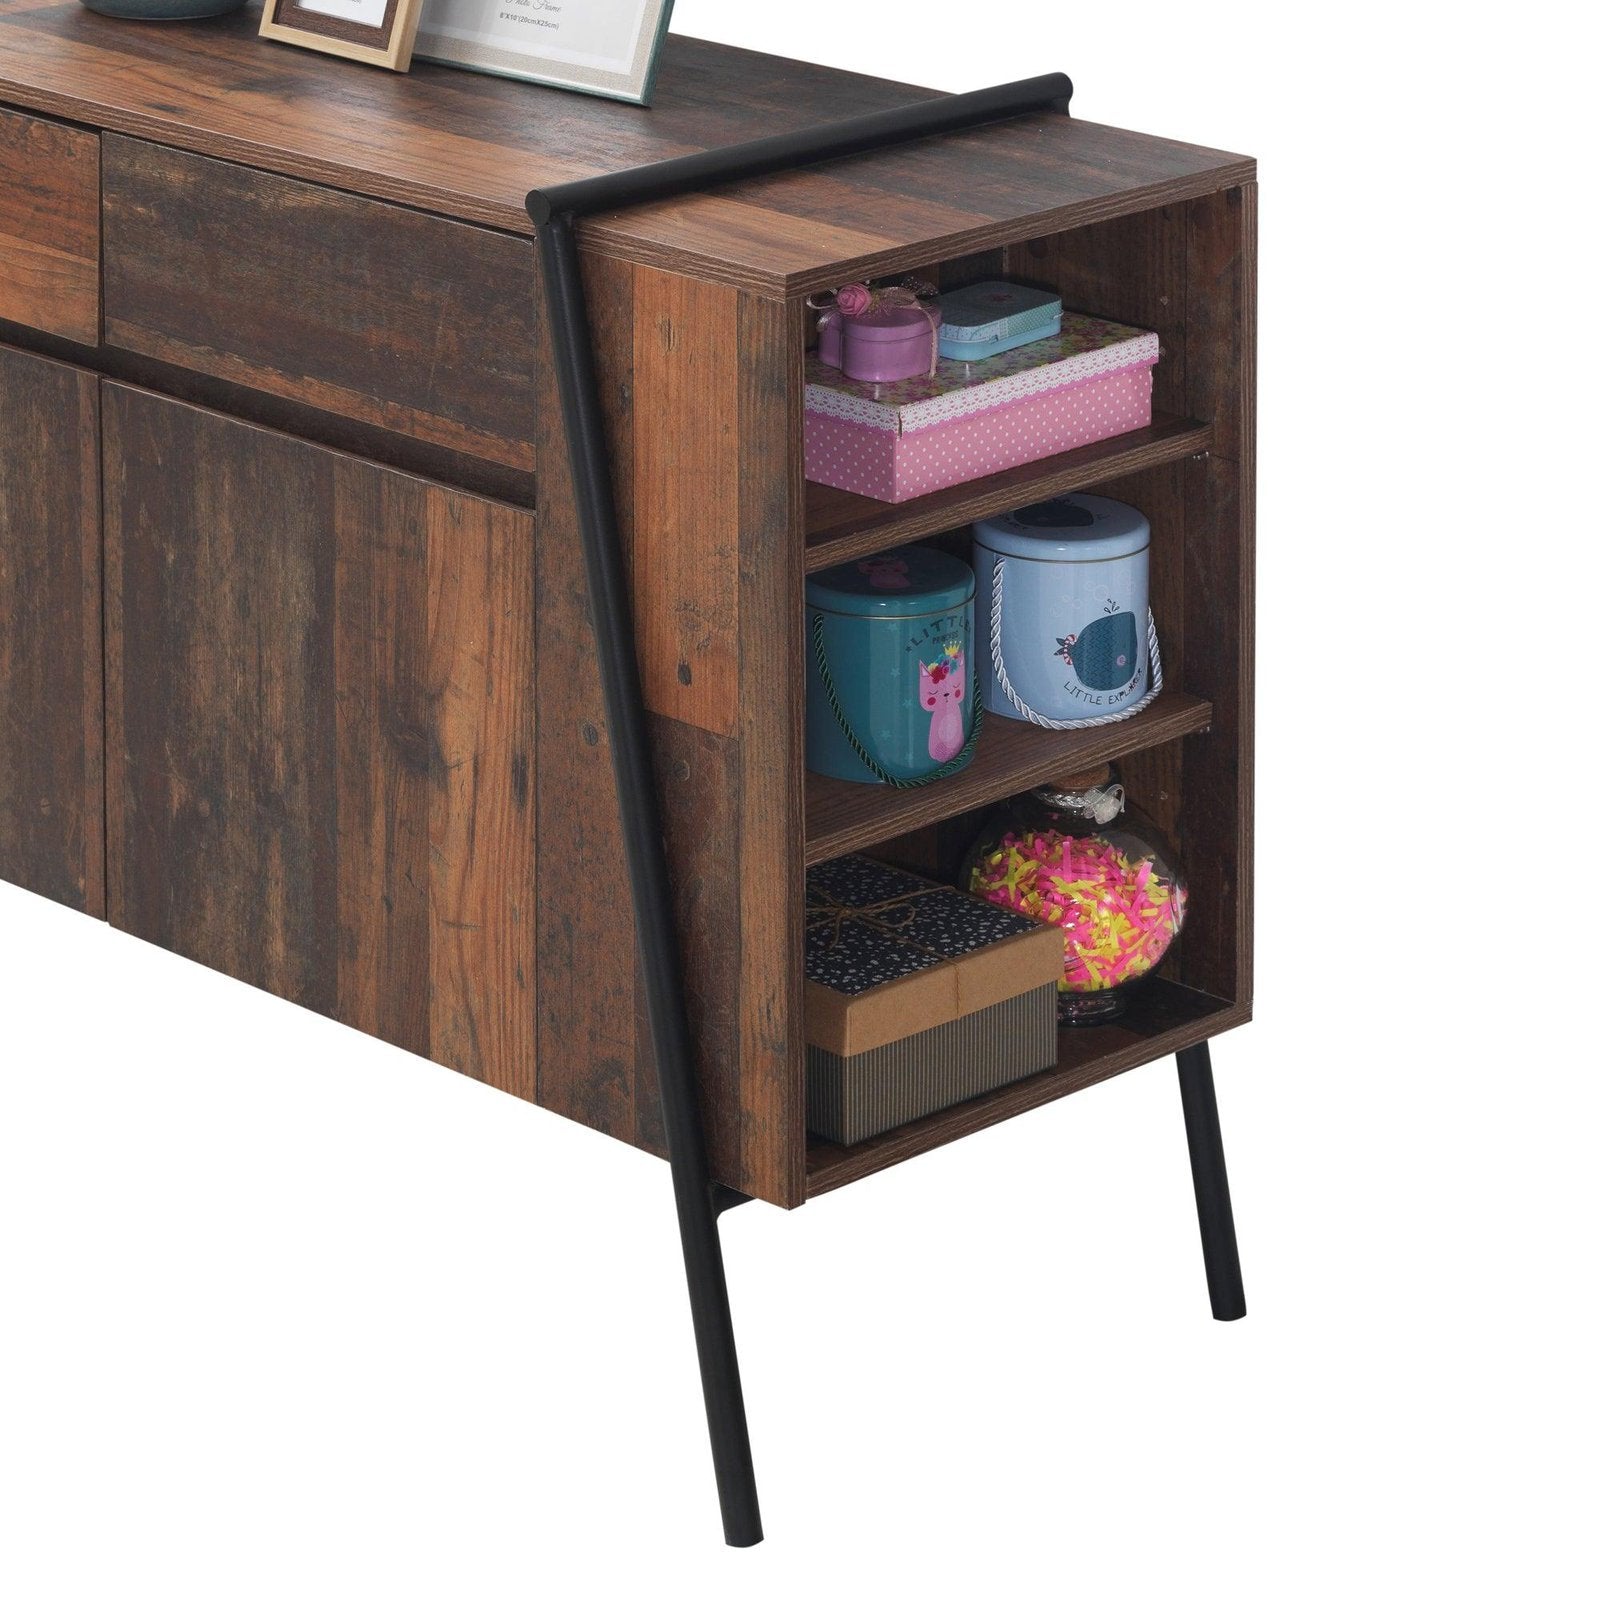 Abbey Door Sideboard Drawers Shelves allhomely